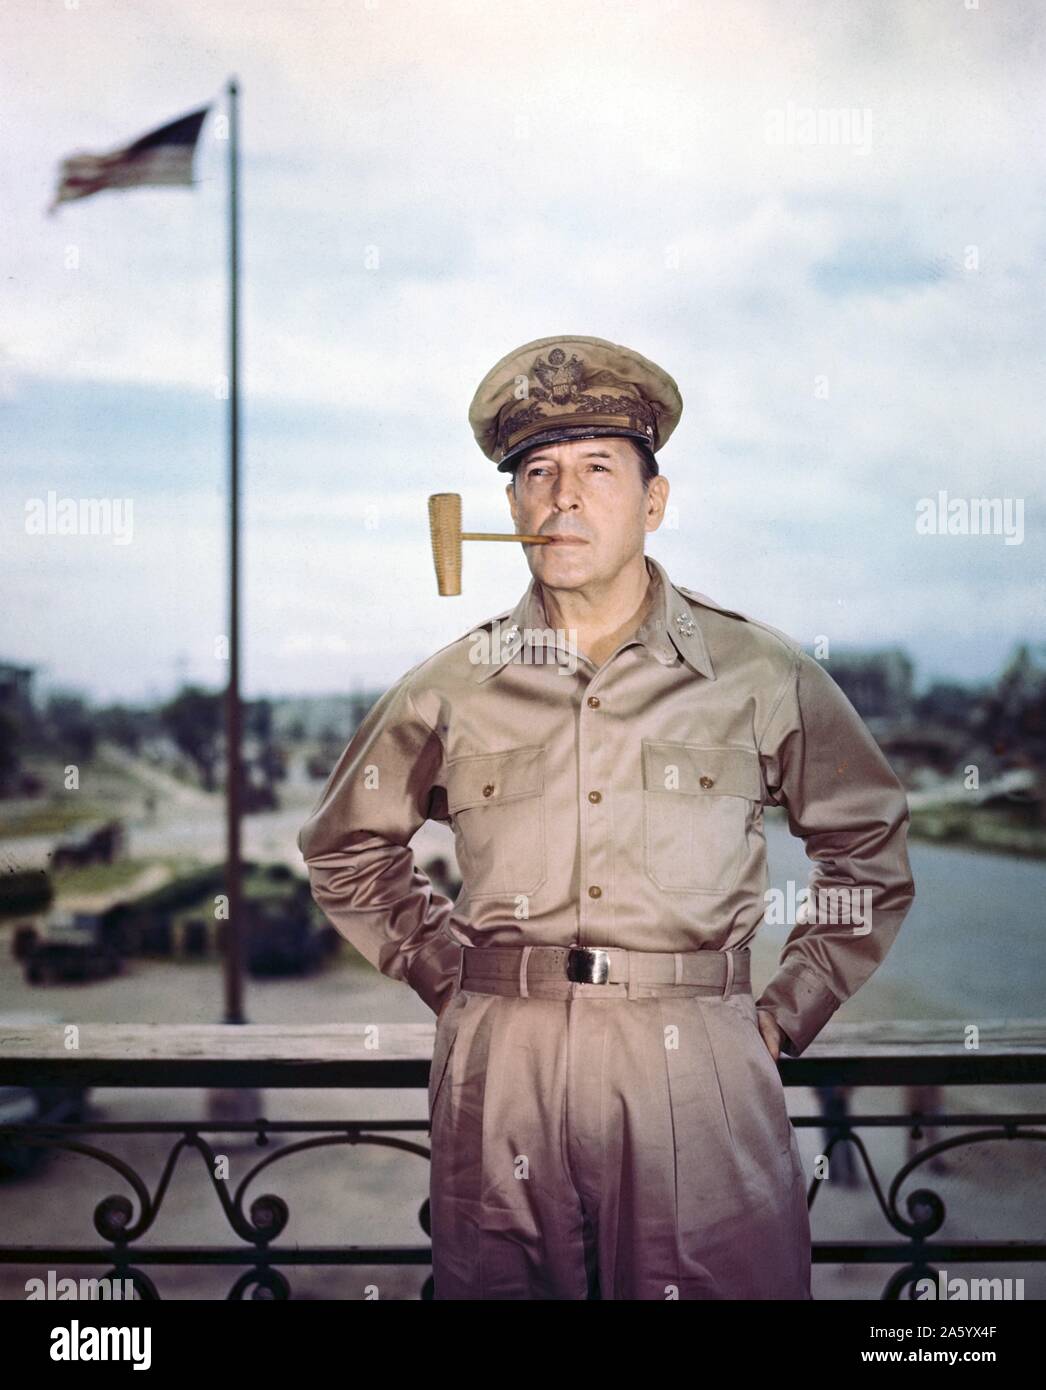 Douglas MacArthur (26 January 1880 – 5 April 1964) was an American five-star general and Field Marshal of the Philippine Army. He was Chief of Staff of the US Army during the 1930s and played a prominent role in the Pacific theater during World War II. He received the Medal of Honor for his service in the Philippines Campaign, which made him and his father Arthur MacArthur, Jr., the first father and son to be awarded the medal. He was one of only five men ever to rise to the rank of General of the Army in the US Army, and the only man ever to become a field marshal in the Philippine Army. Stock Photo